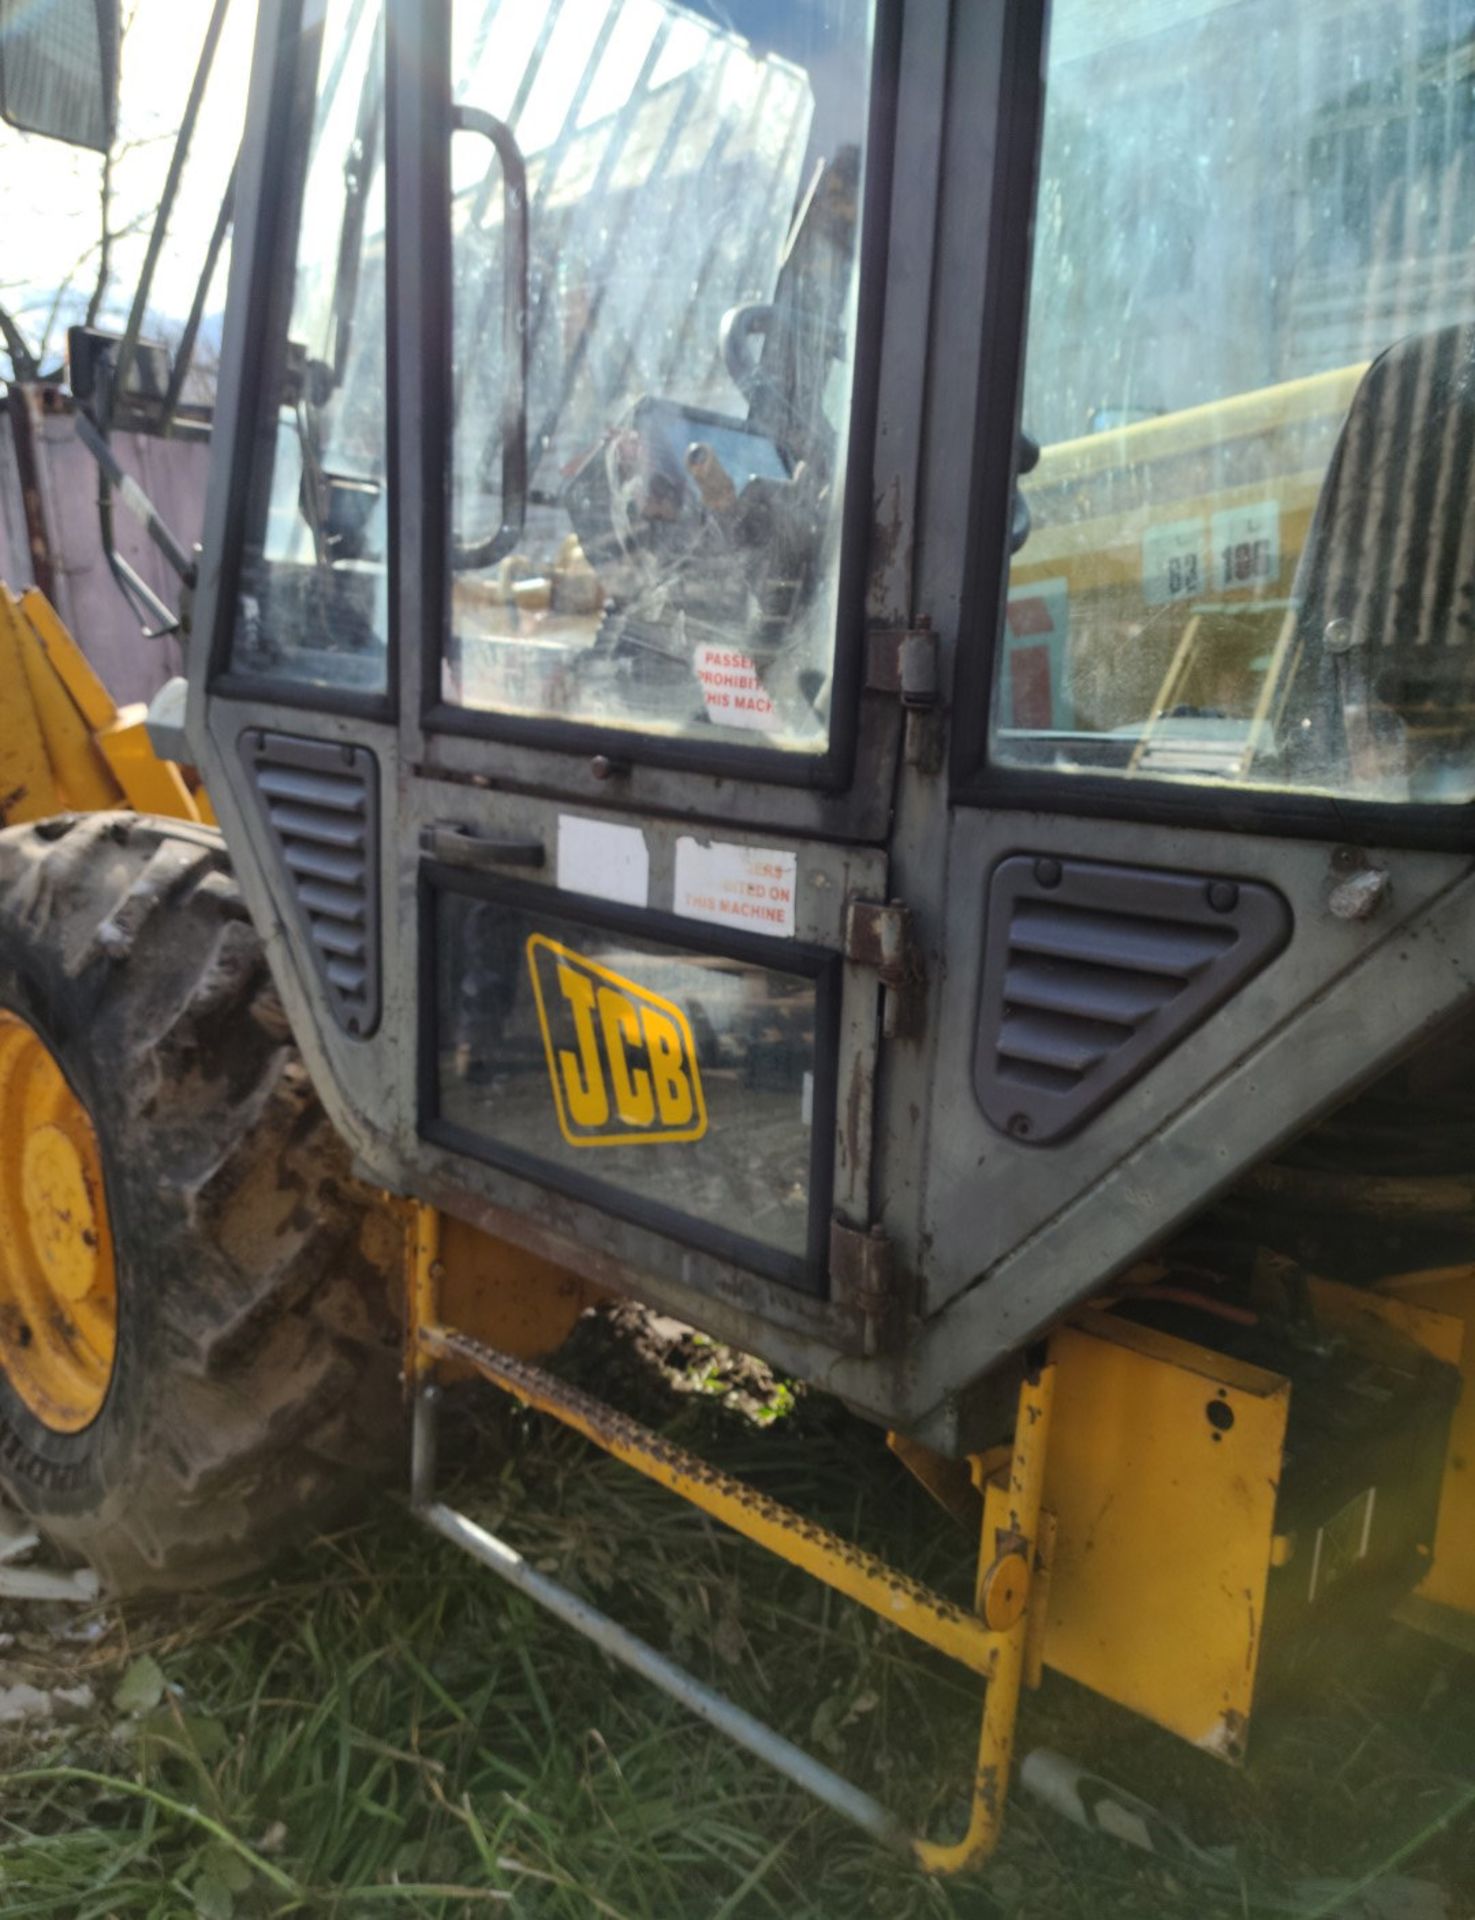 1 x JCB Loadall Telehandler 530-120 - 7540 Hours - CL846 - Location: Oxford OX2 - Image 20 of 49